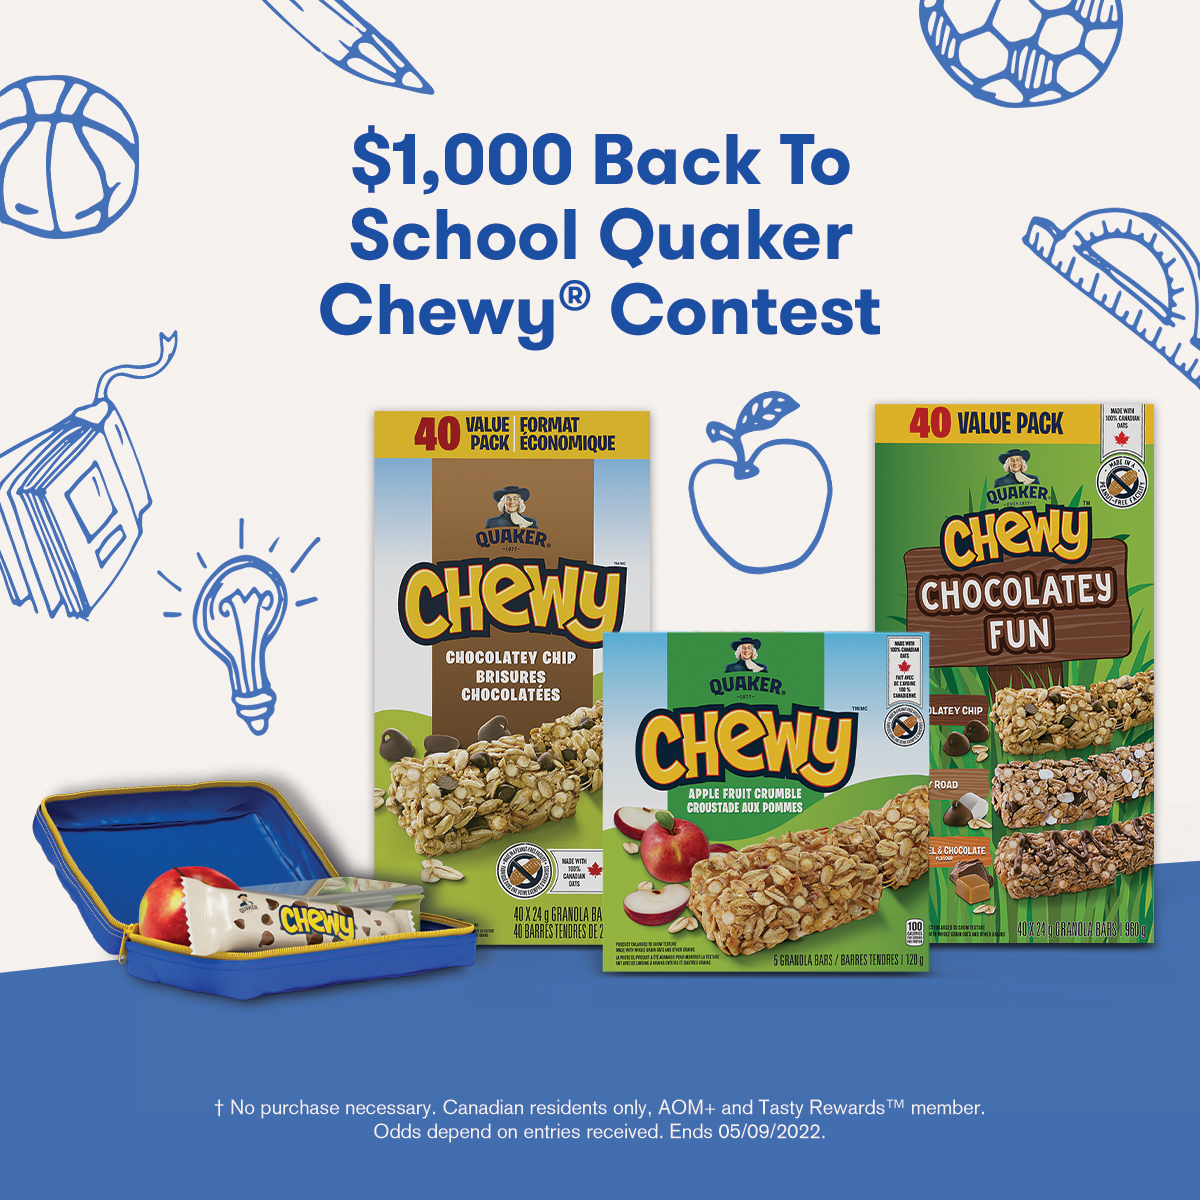 $1,000 Back To School Quaker Chewy<sup>®</sup> Contest